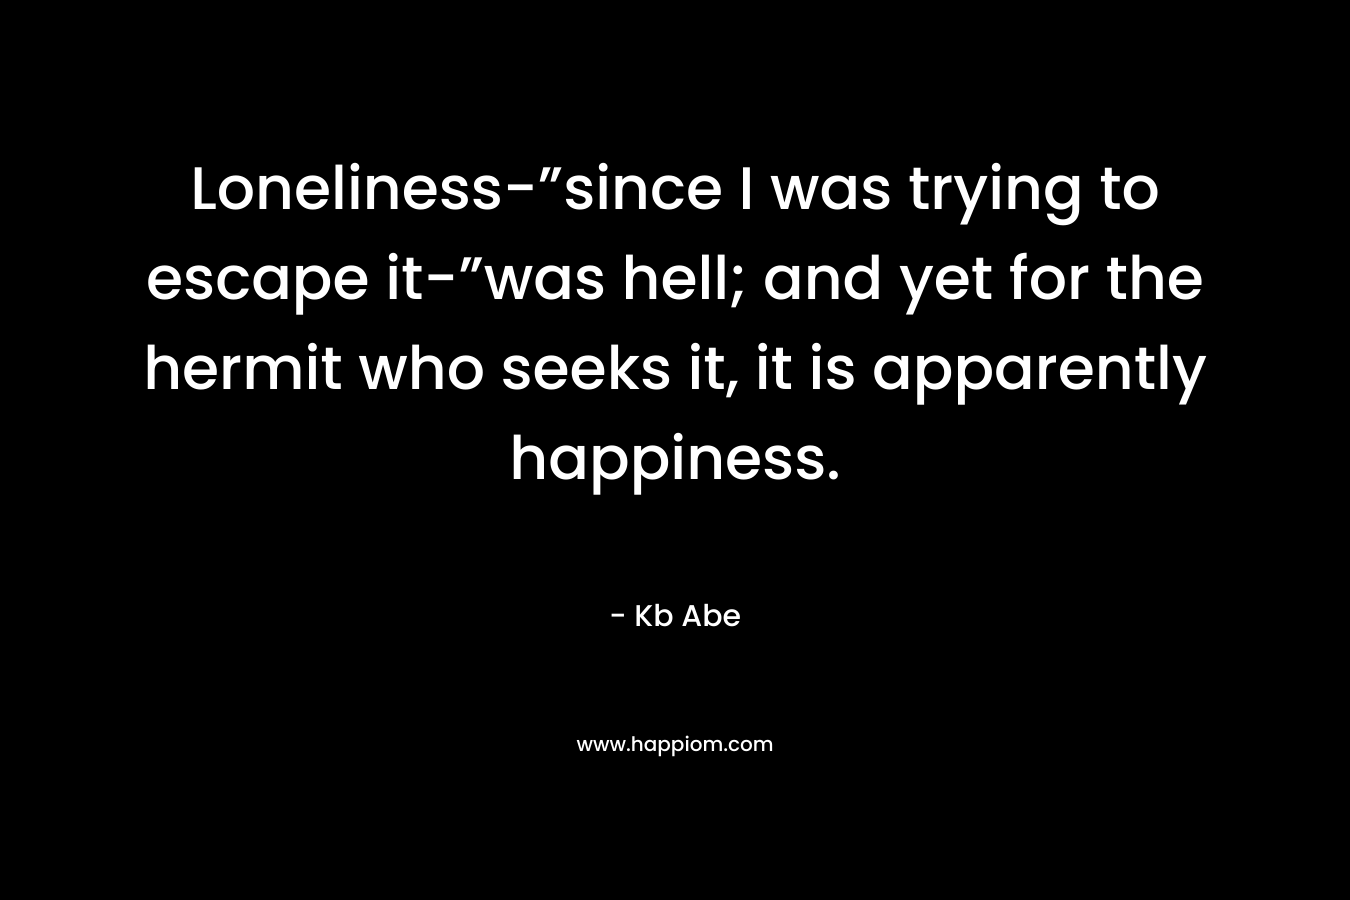 Loneliness-”since I was trying to escape it-”was hell; and yet for the hermit who seeks it, it is apparently happiness.